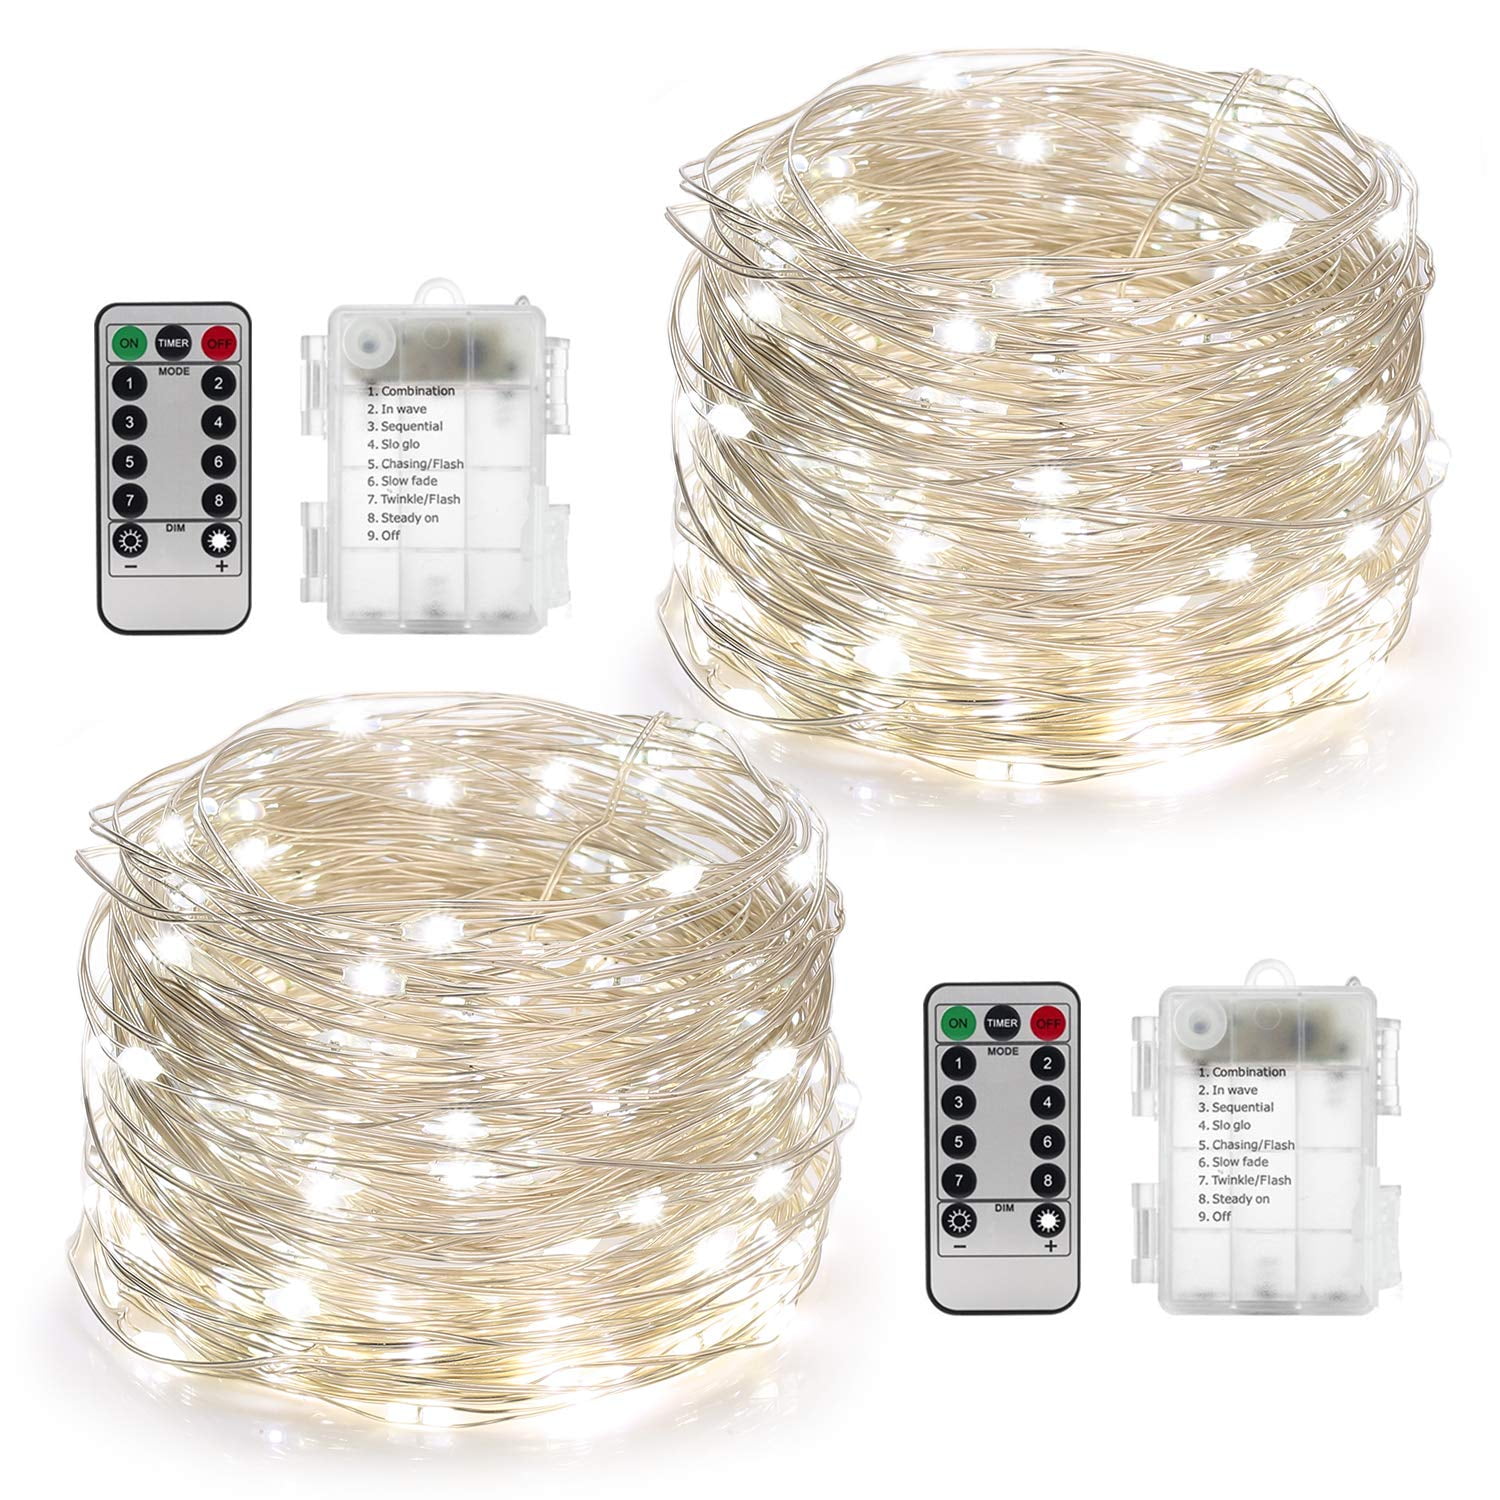 Light 100 LED Battery Powered Silver Wire Christmas String Fairy Lights W/Remote 